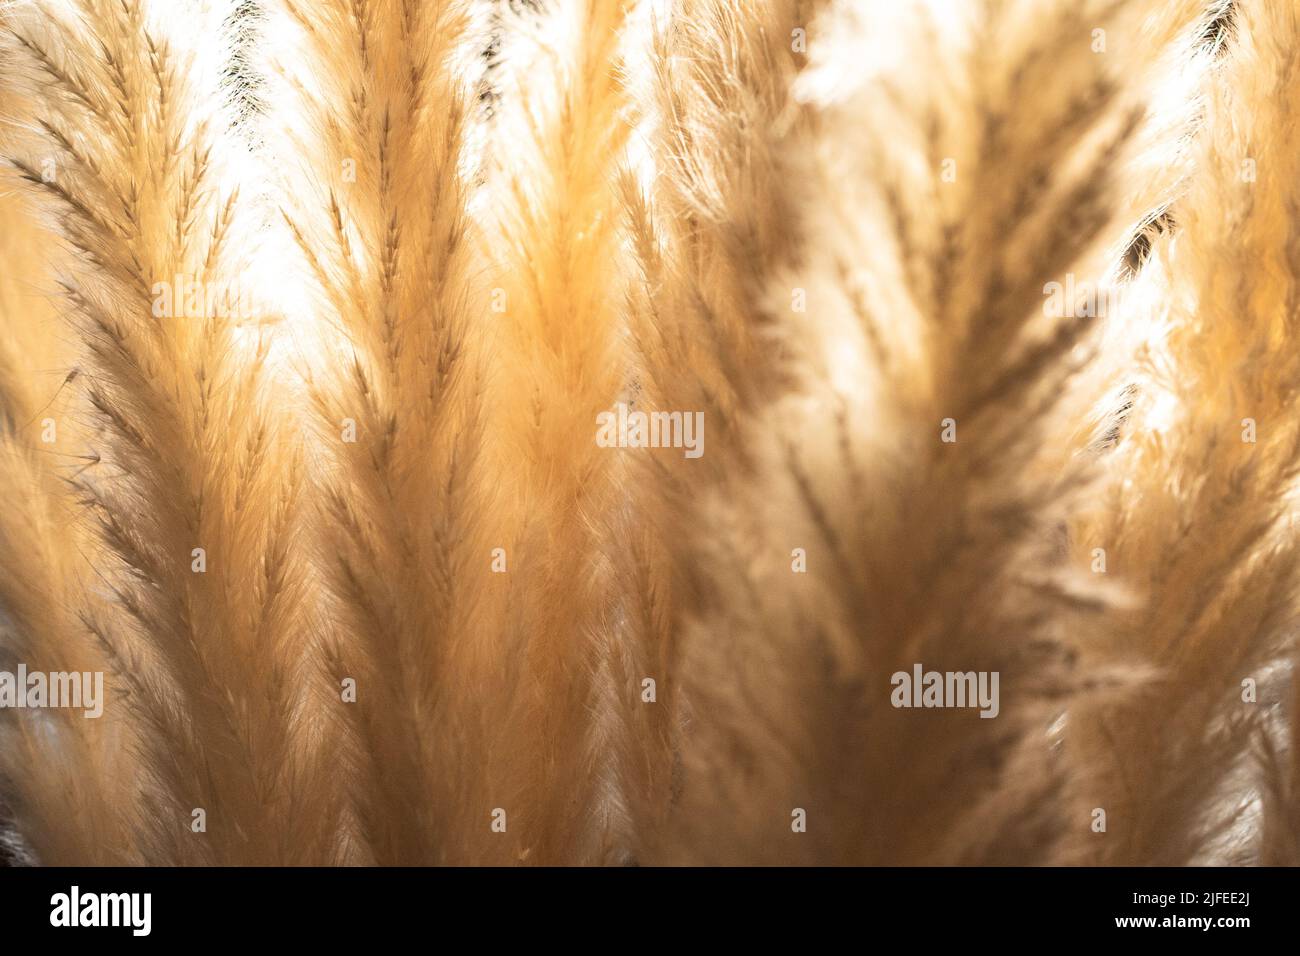 Pampas grass blurred, abstract nature background. Cortaderia selloana plant with blur. Stock Photo